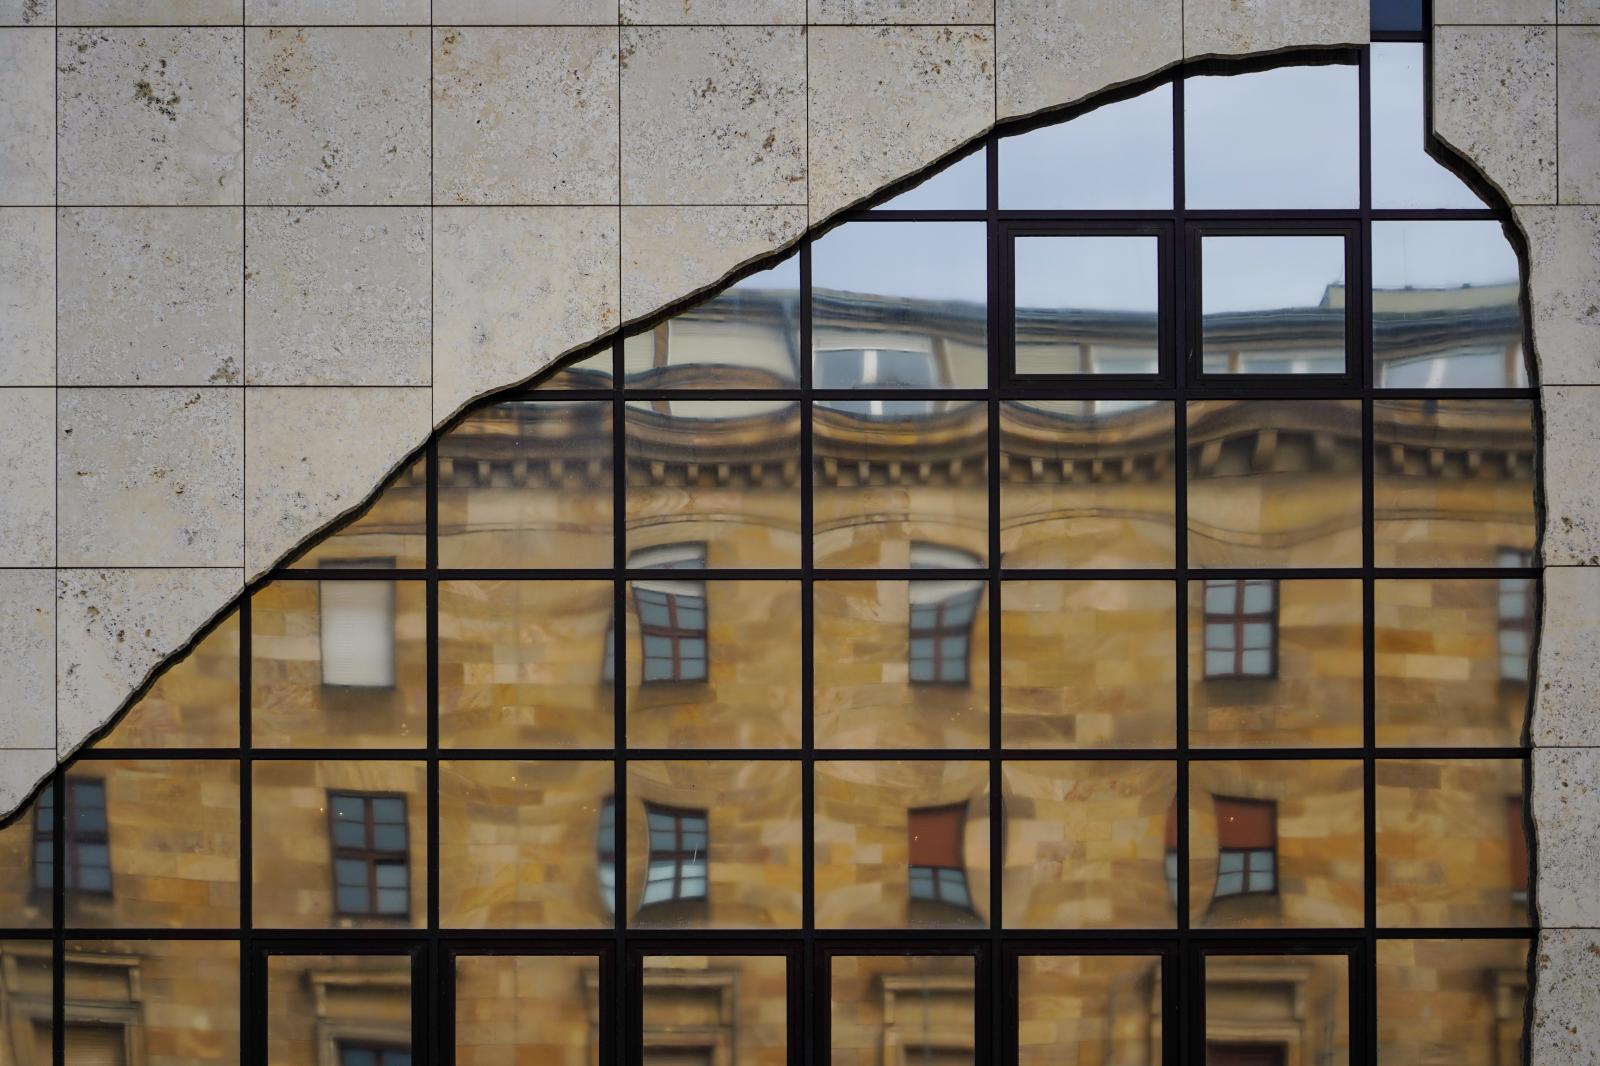 Image from Facades Architecture (2) <br /> Fascination of the Faces of Buildings -  Mannheim, Germany  # 4004 8/2023 Reflections in the...